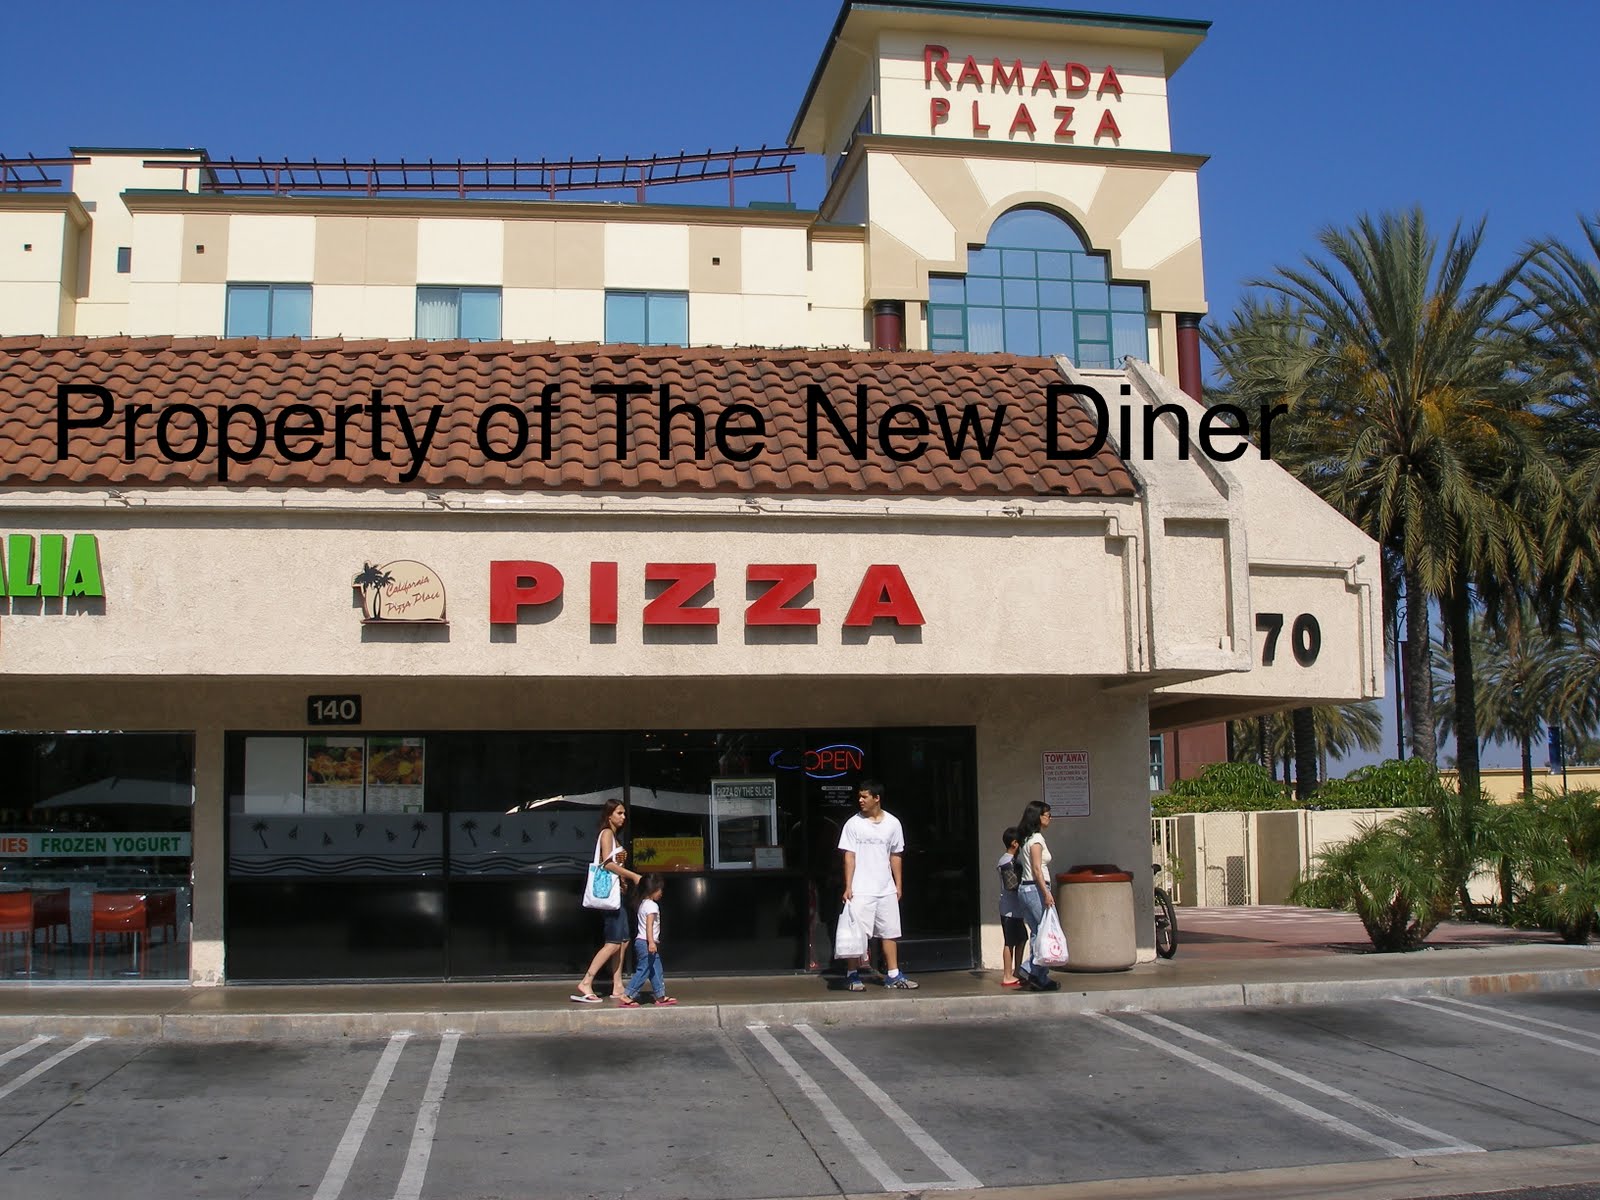 The New Diner: California Pizza Place